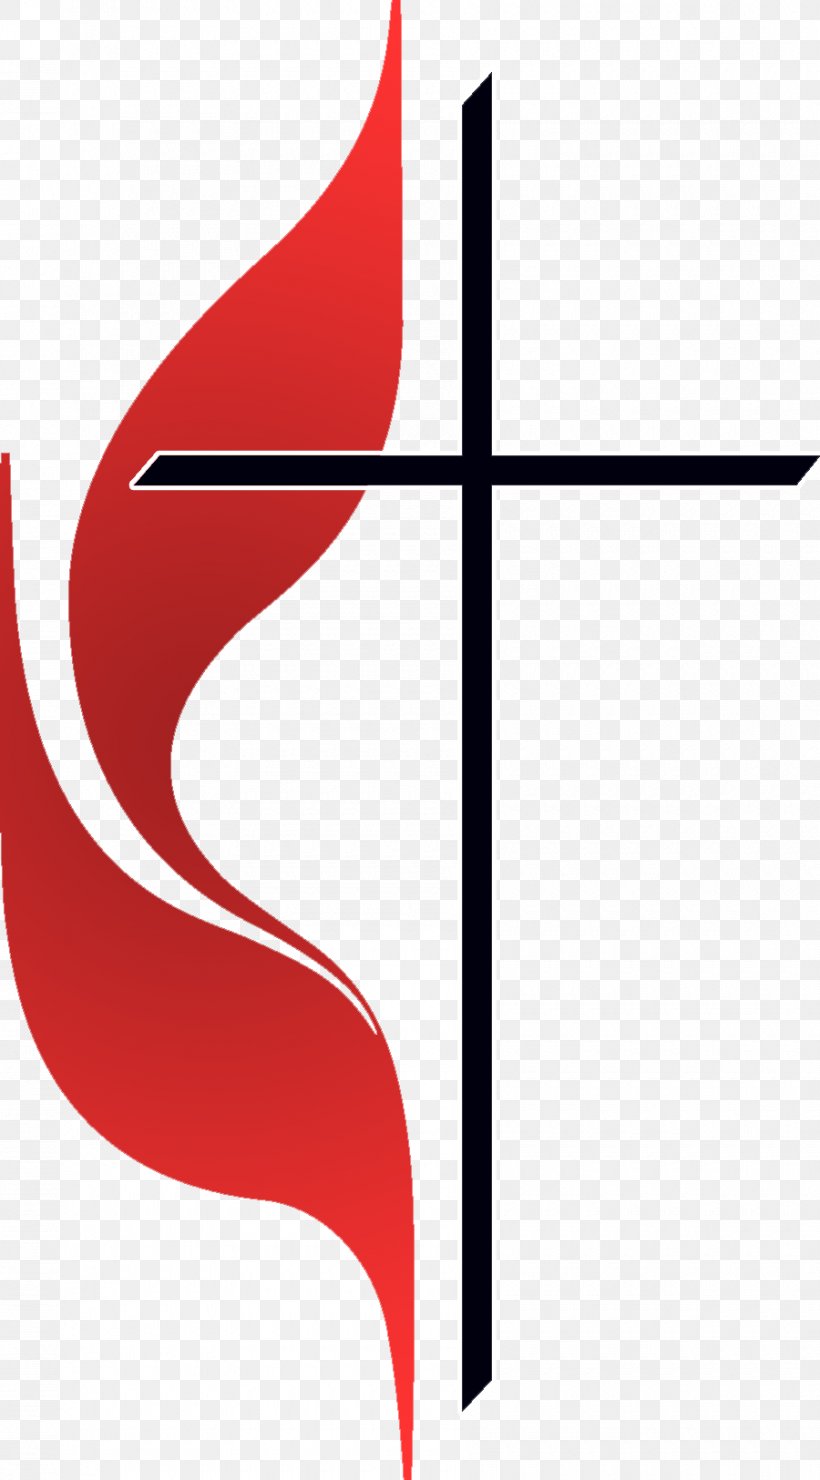 United Methodist Church Cross And Flame Methodism Christian Cross, PNG, 900x1625px, United Methodist Church, Christian Church, Christian Cross, Christian Mission, Christianity Download Free